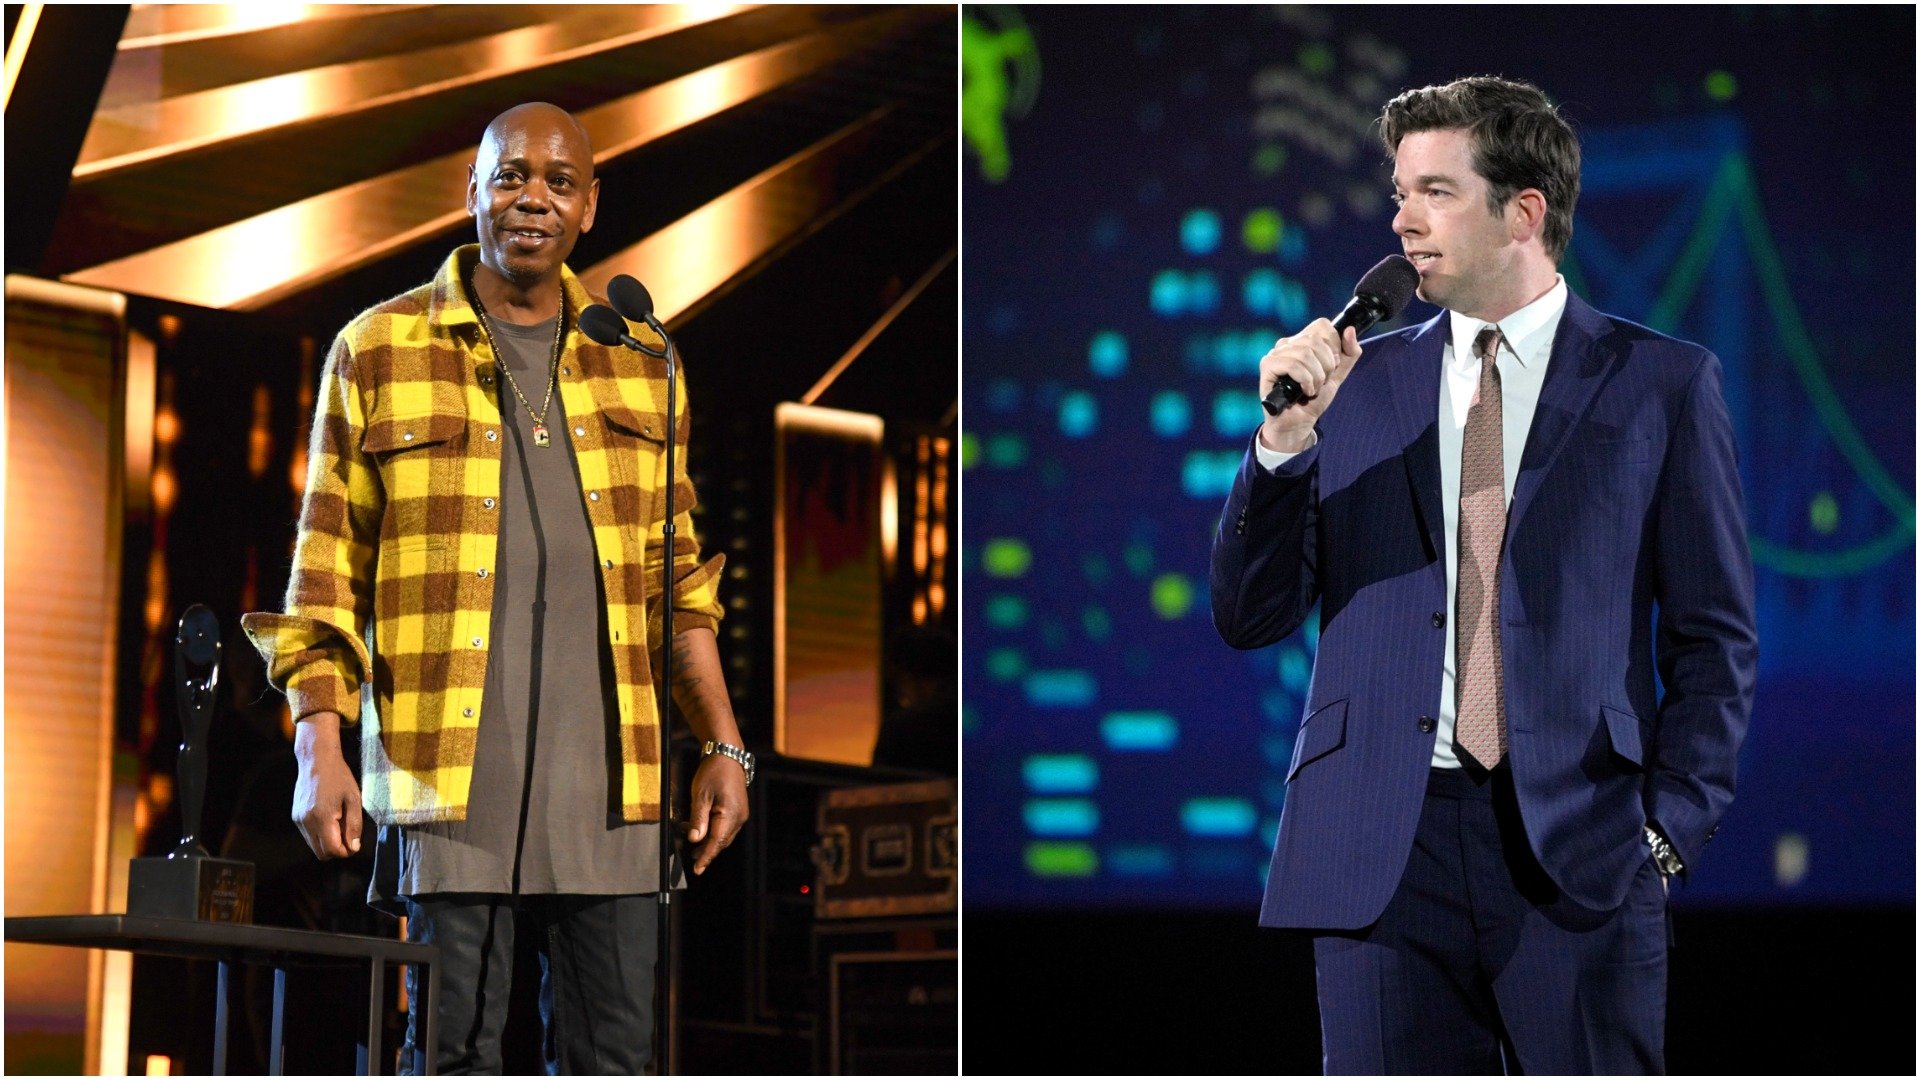 Dave Chappelle at the Rock and Roll Hall of Fame. John Mulaney performs standup 